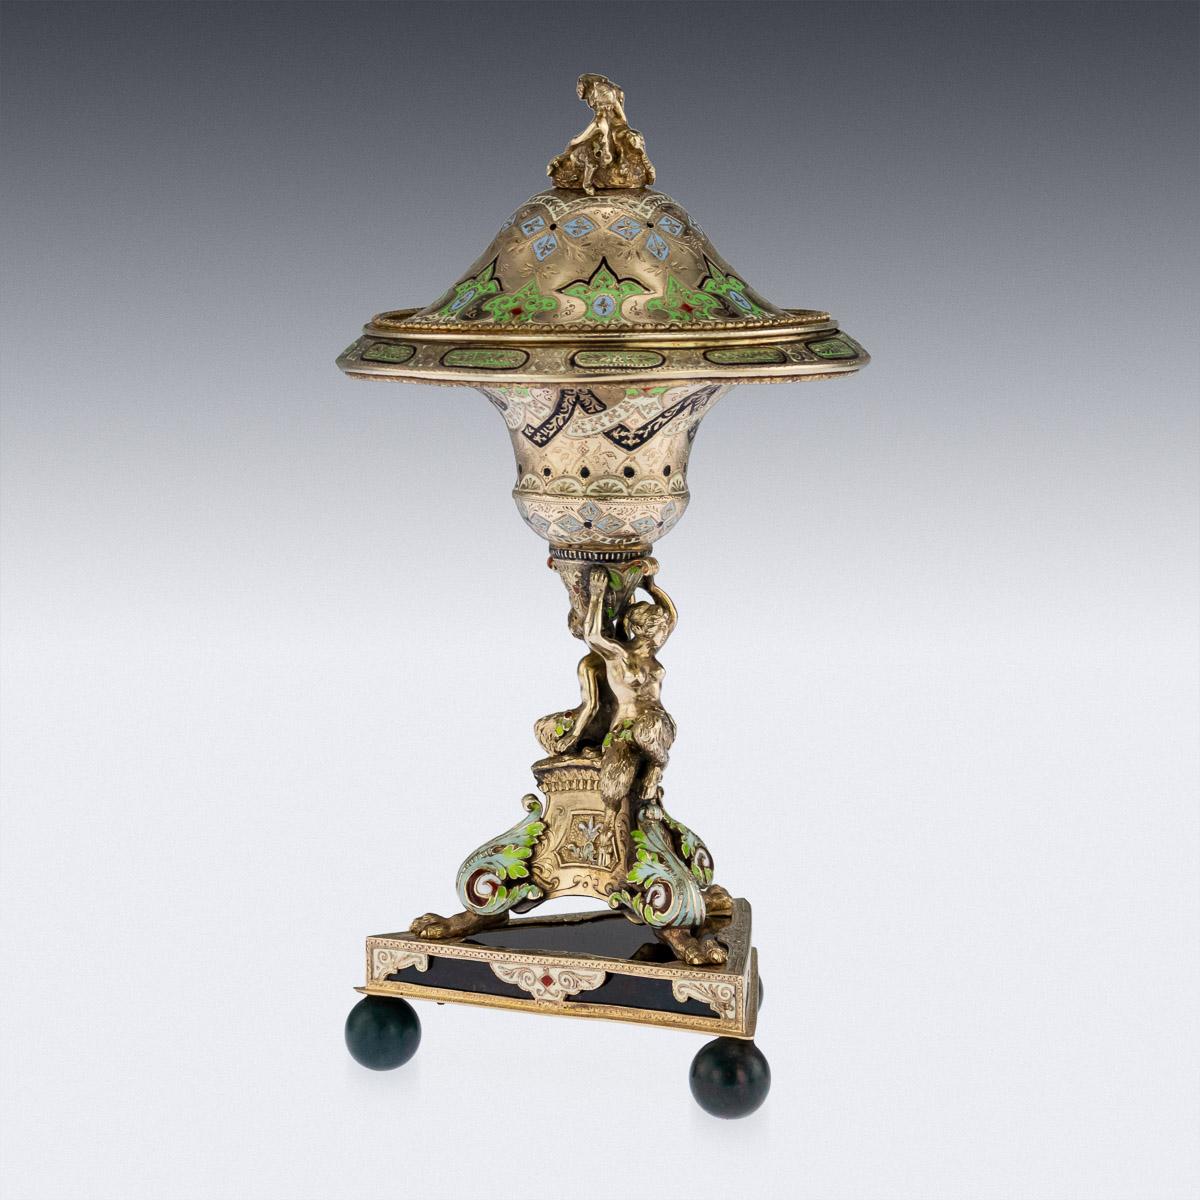 Antique late-19th century Austrian exceptional solid silver-gilt, enamel and blood stone set lidded tazza, standing on a triangular base set with three ball feet, the stem formed as a plinth on paw feet topped by fawns holding up the bowl with